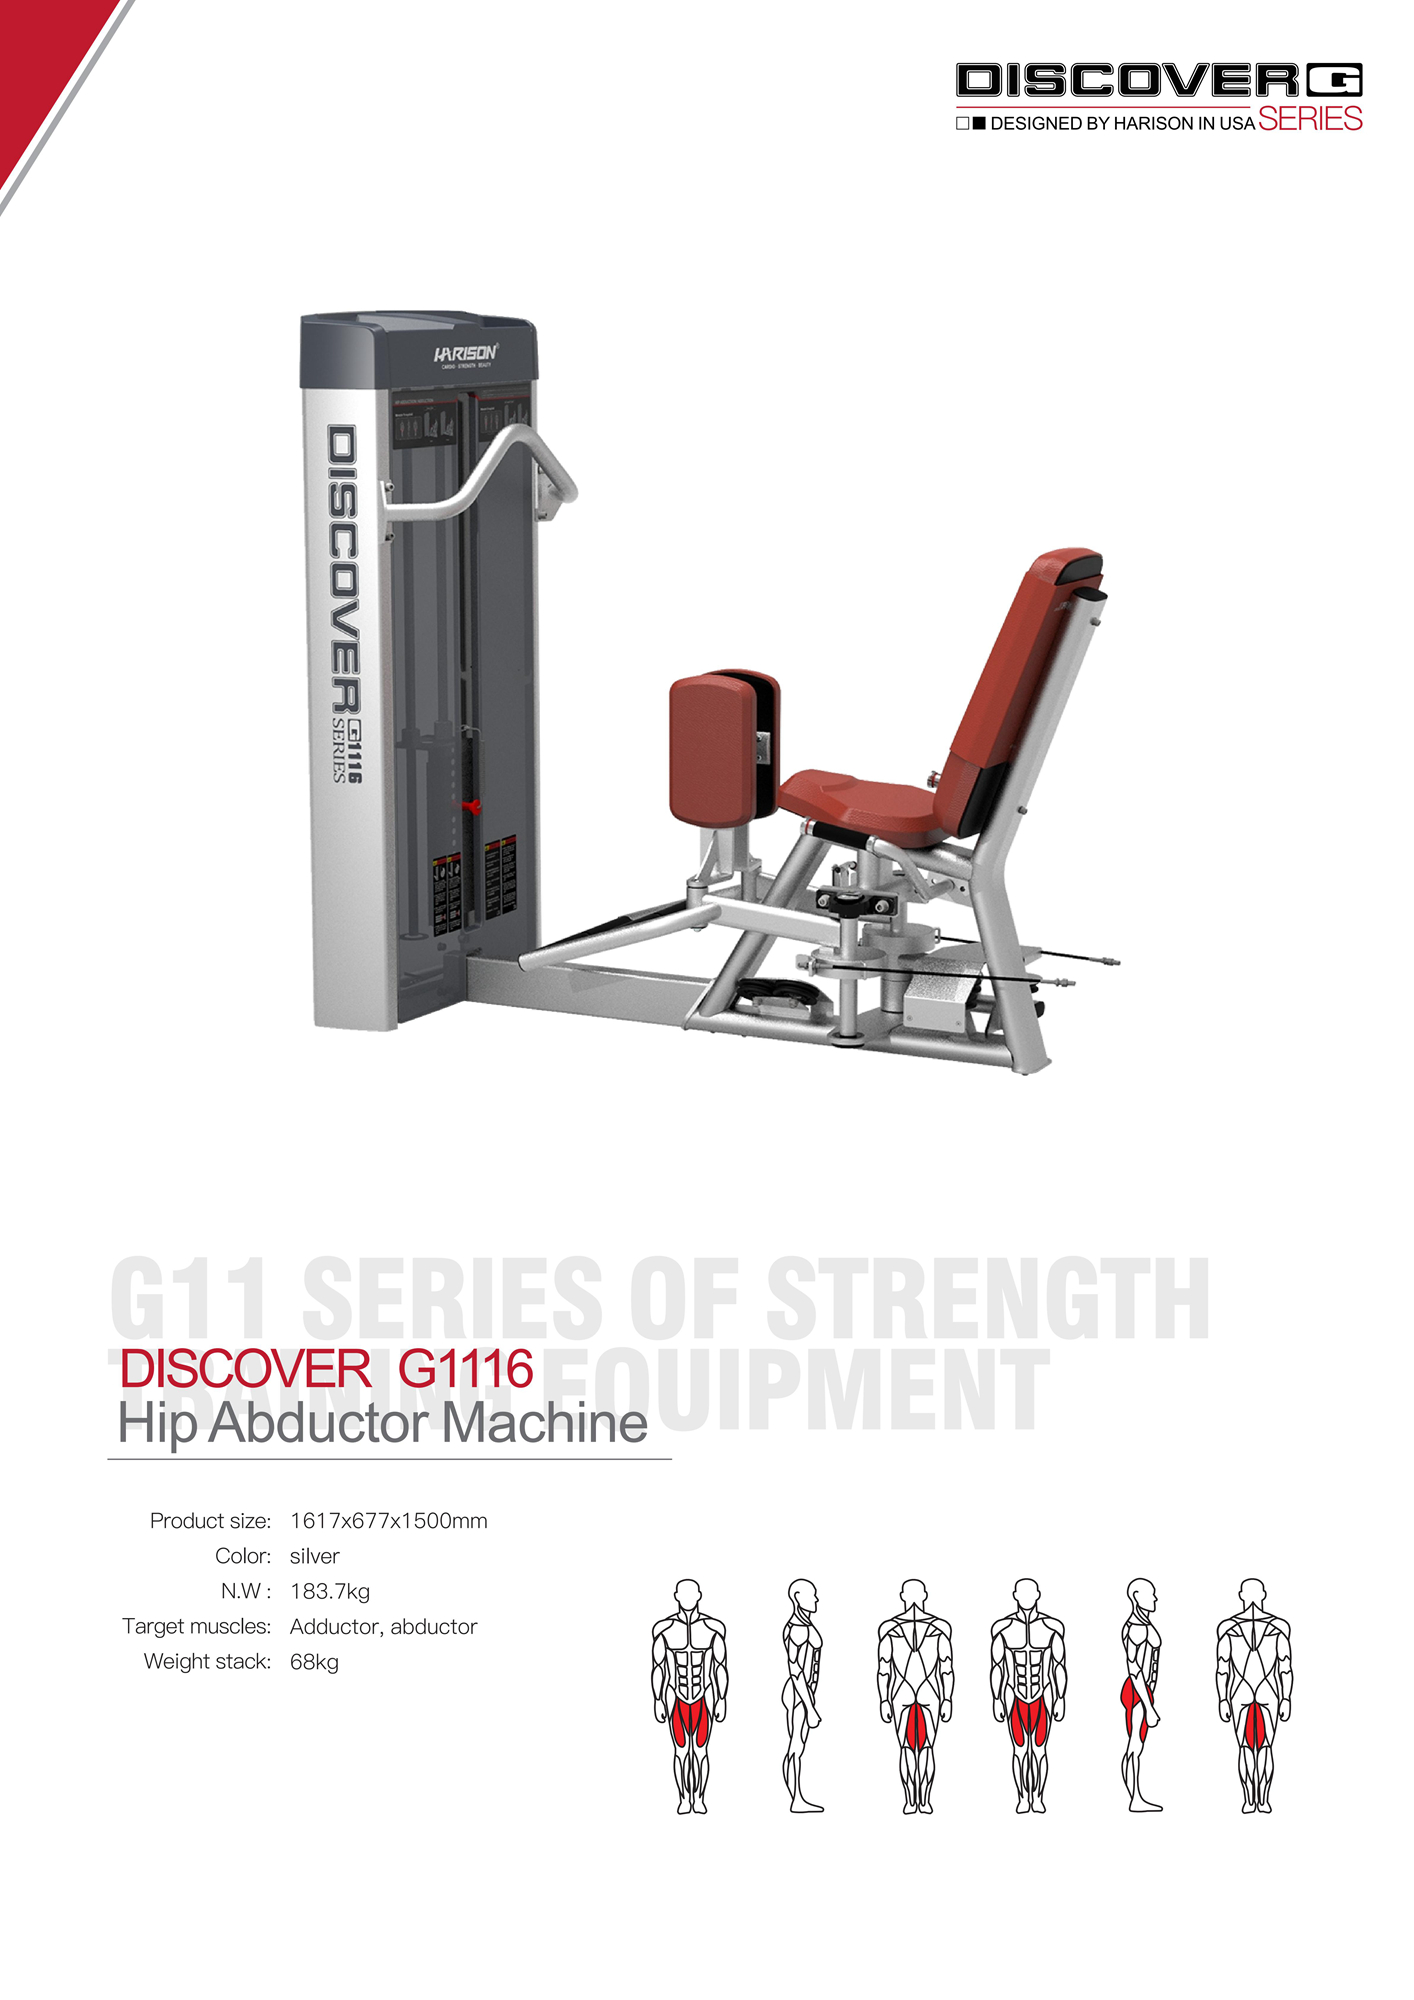 DISCOVER G1116 Hip Abductor Machine